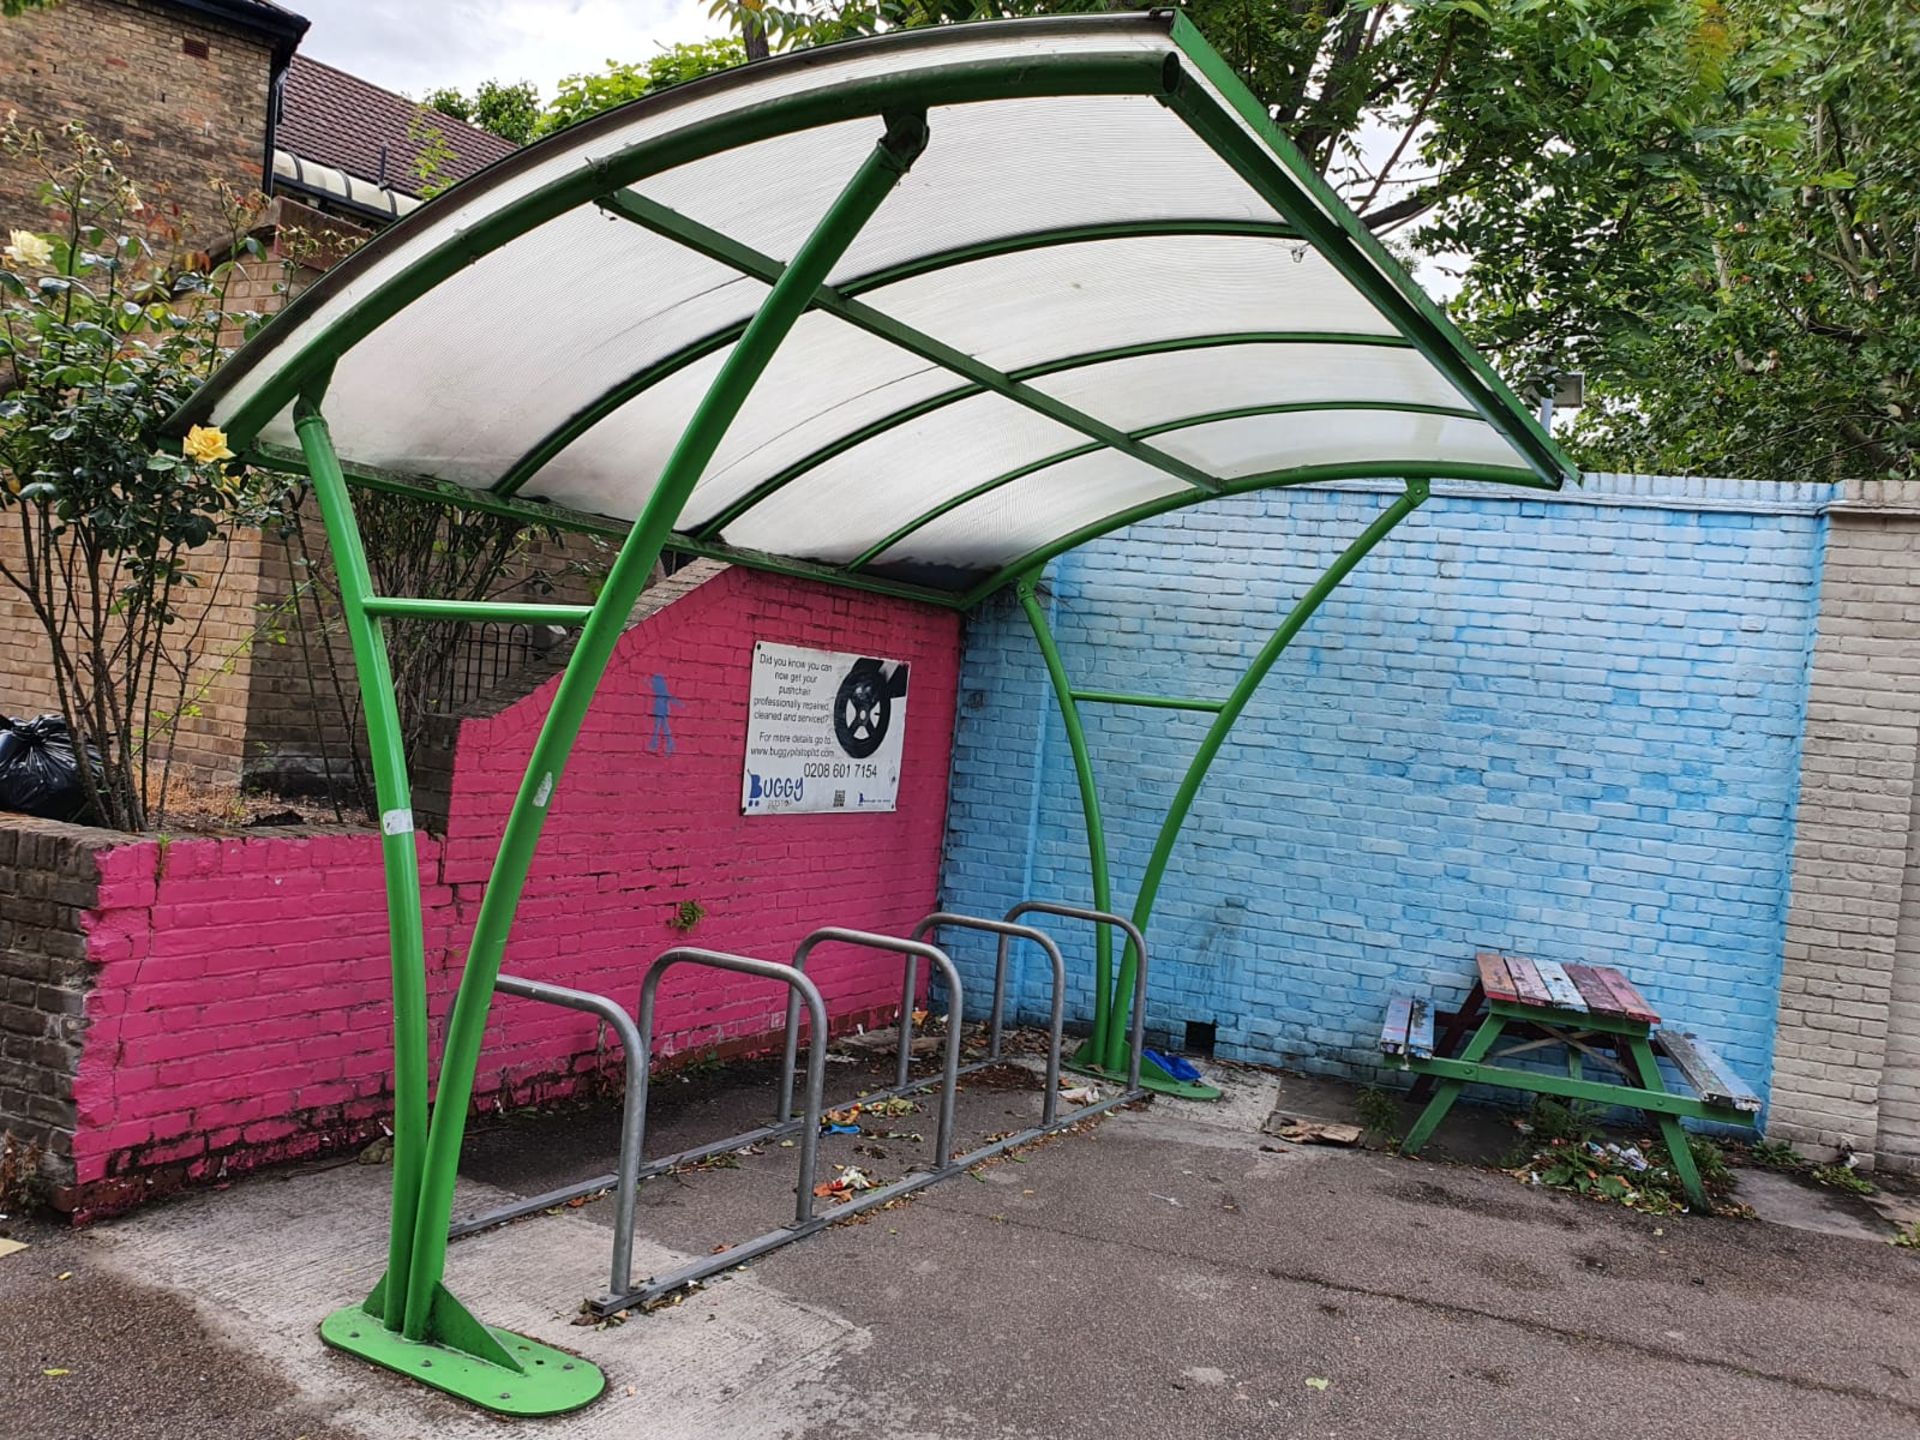 1 x Bike Shelter With Bike Racks - Suitable For Upto 8 Bikes - Contemporary Design - Suitable For - Image 8 of 9